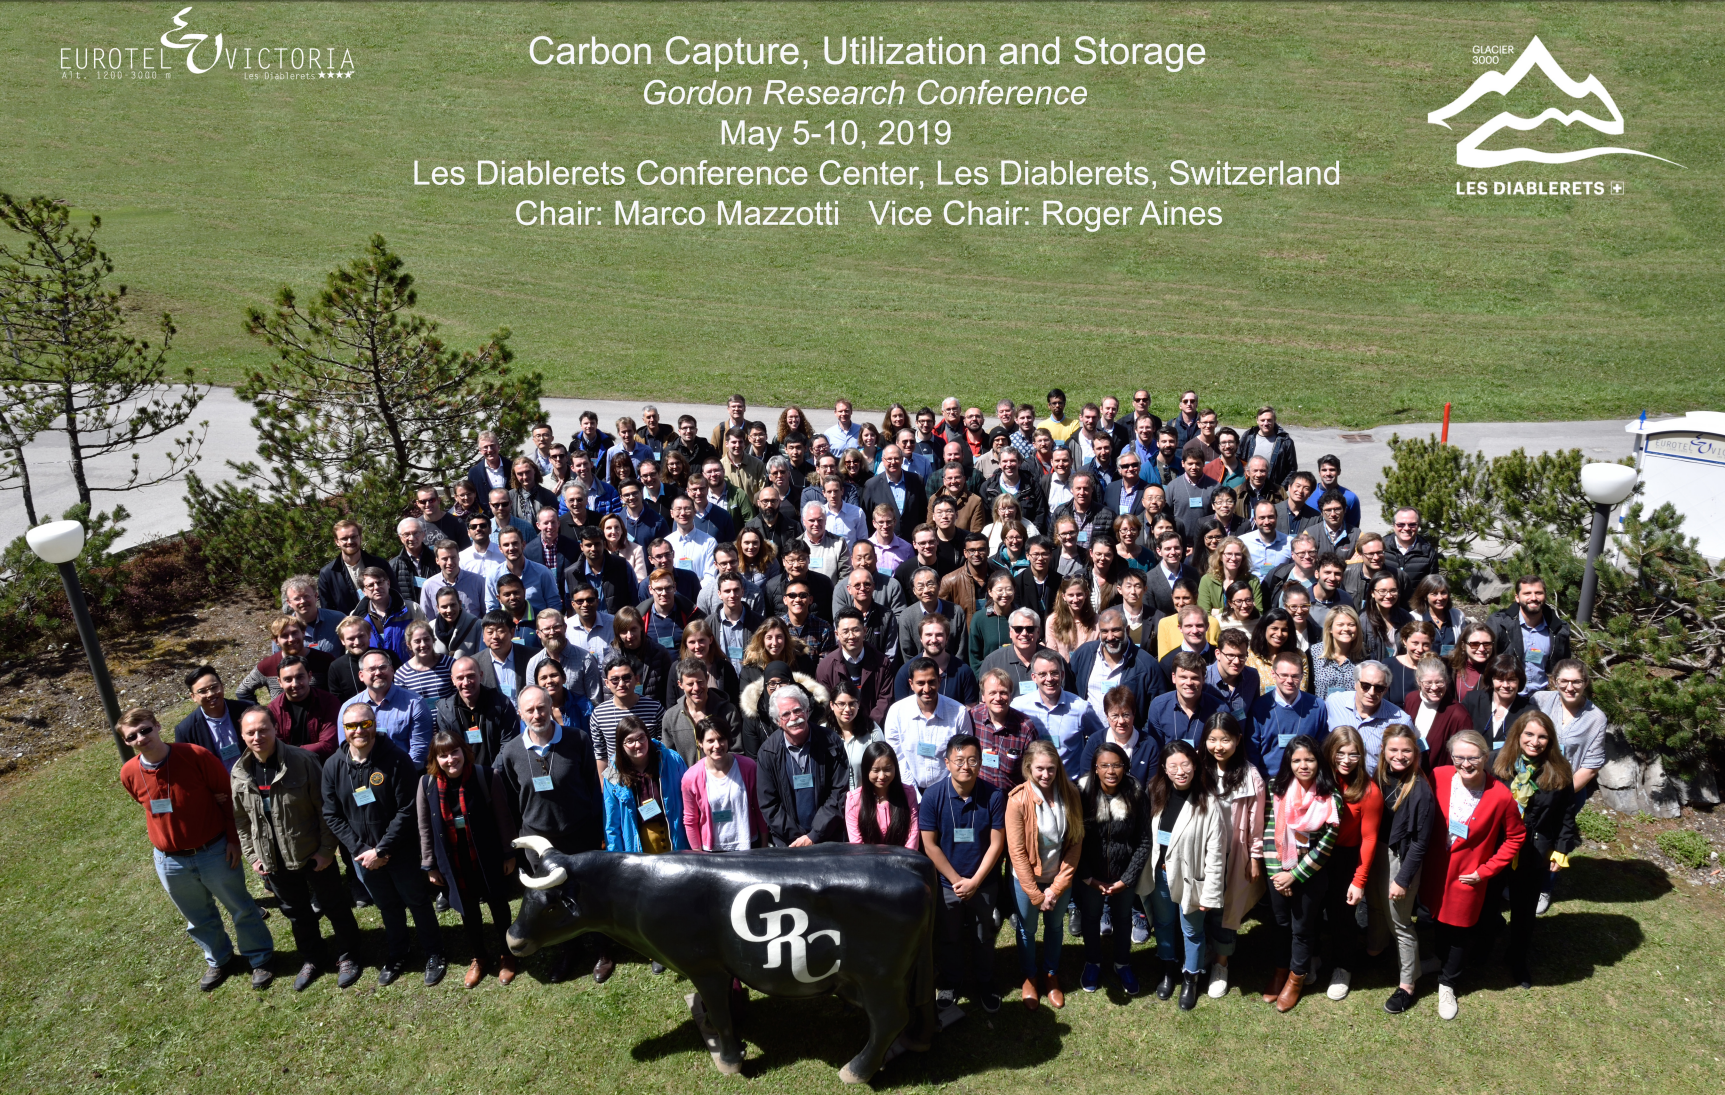 Approximately 200 of the conference attendees stand in a grassy field in Switzerland